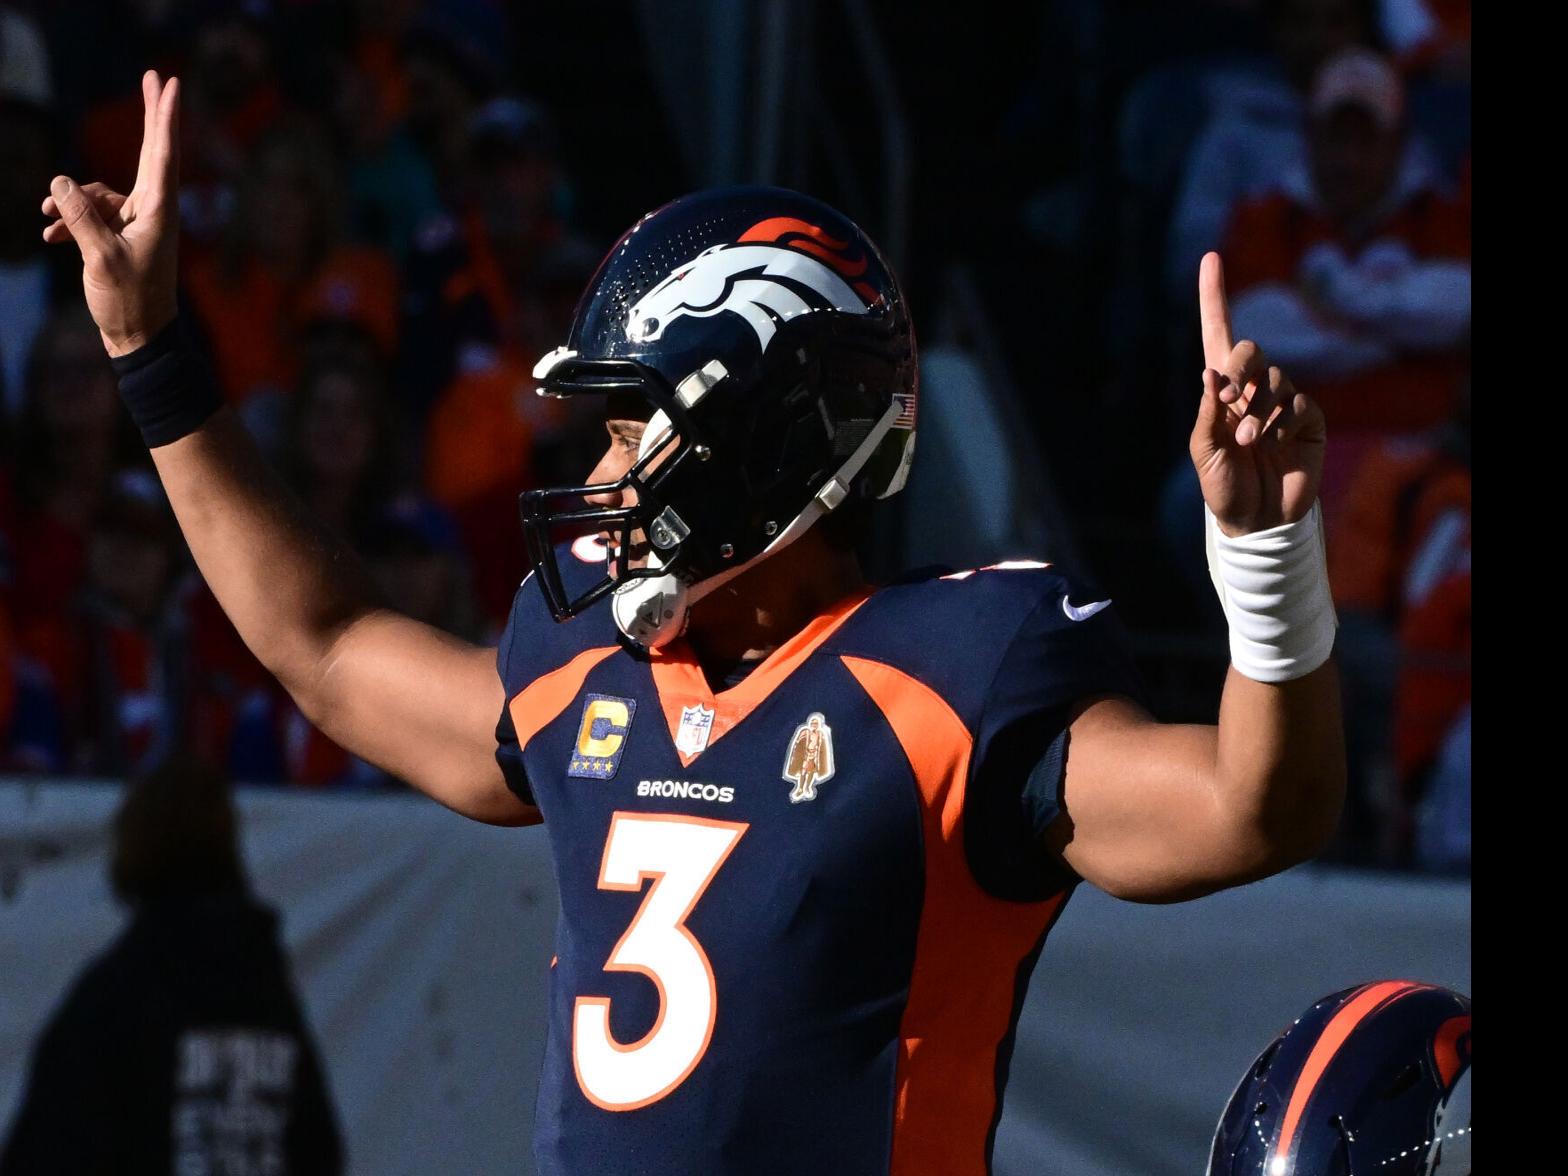 Russell Wilson injury: Broncos QB in concussion protocol after